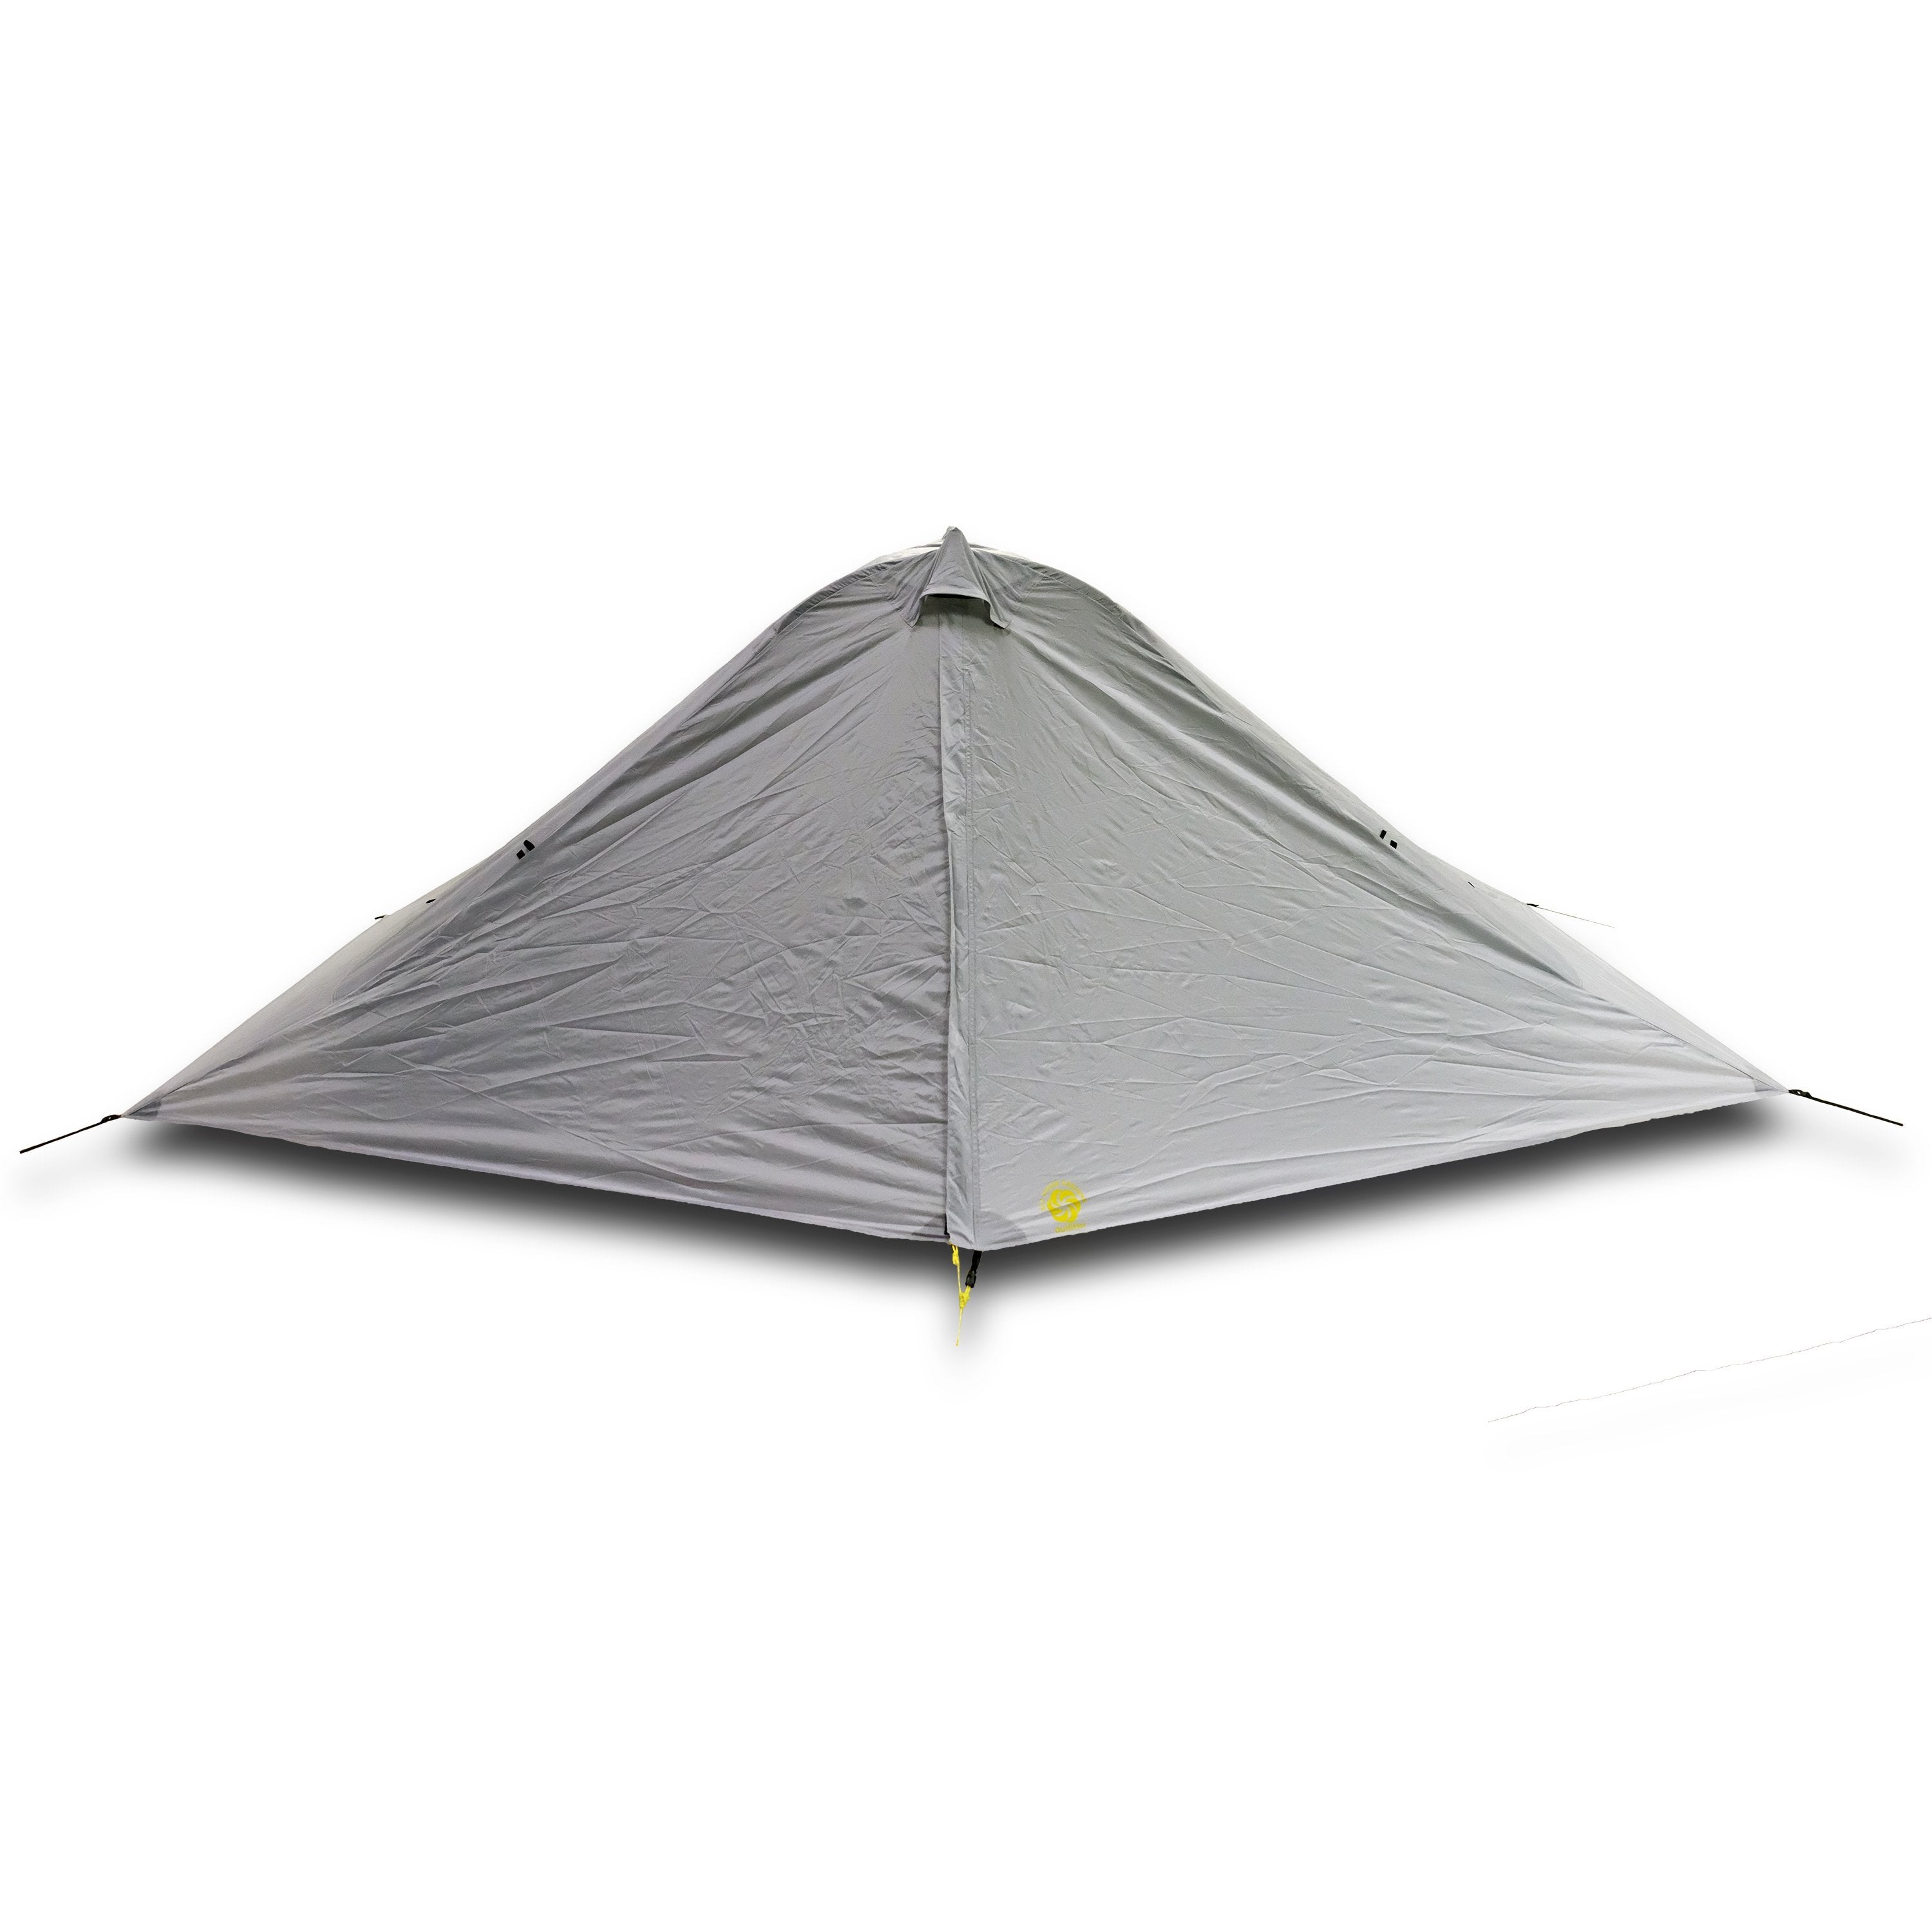 Lunar Duo Outfitter Hiking Tent